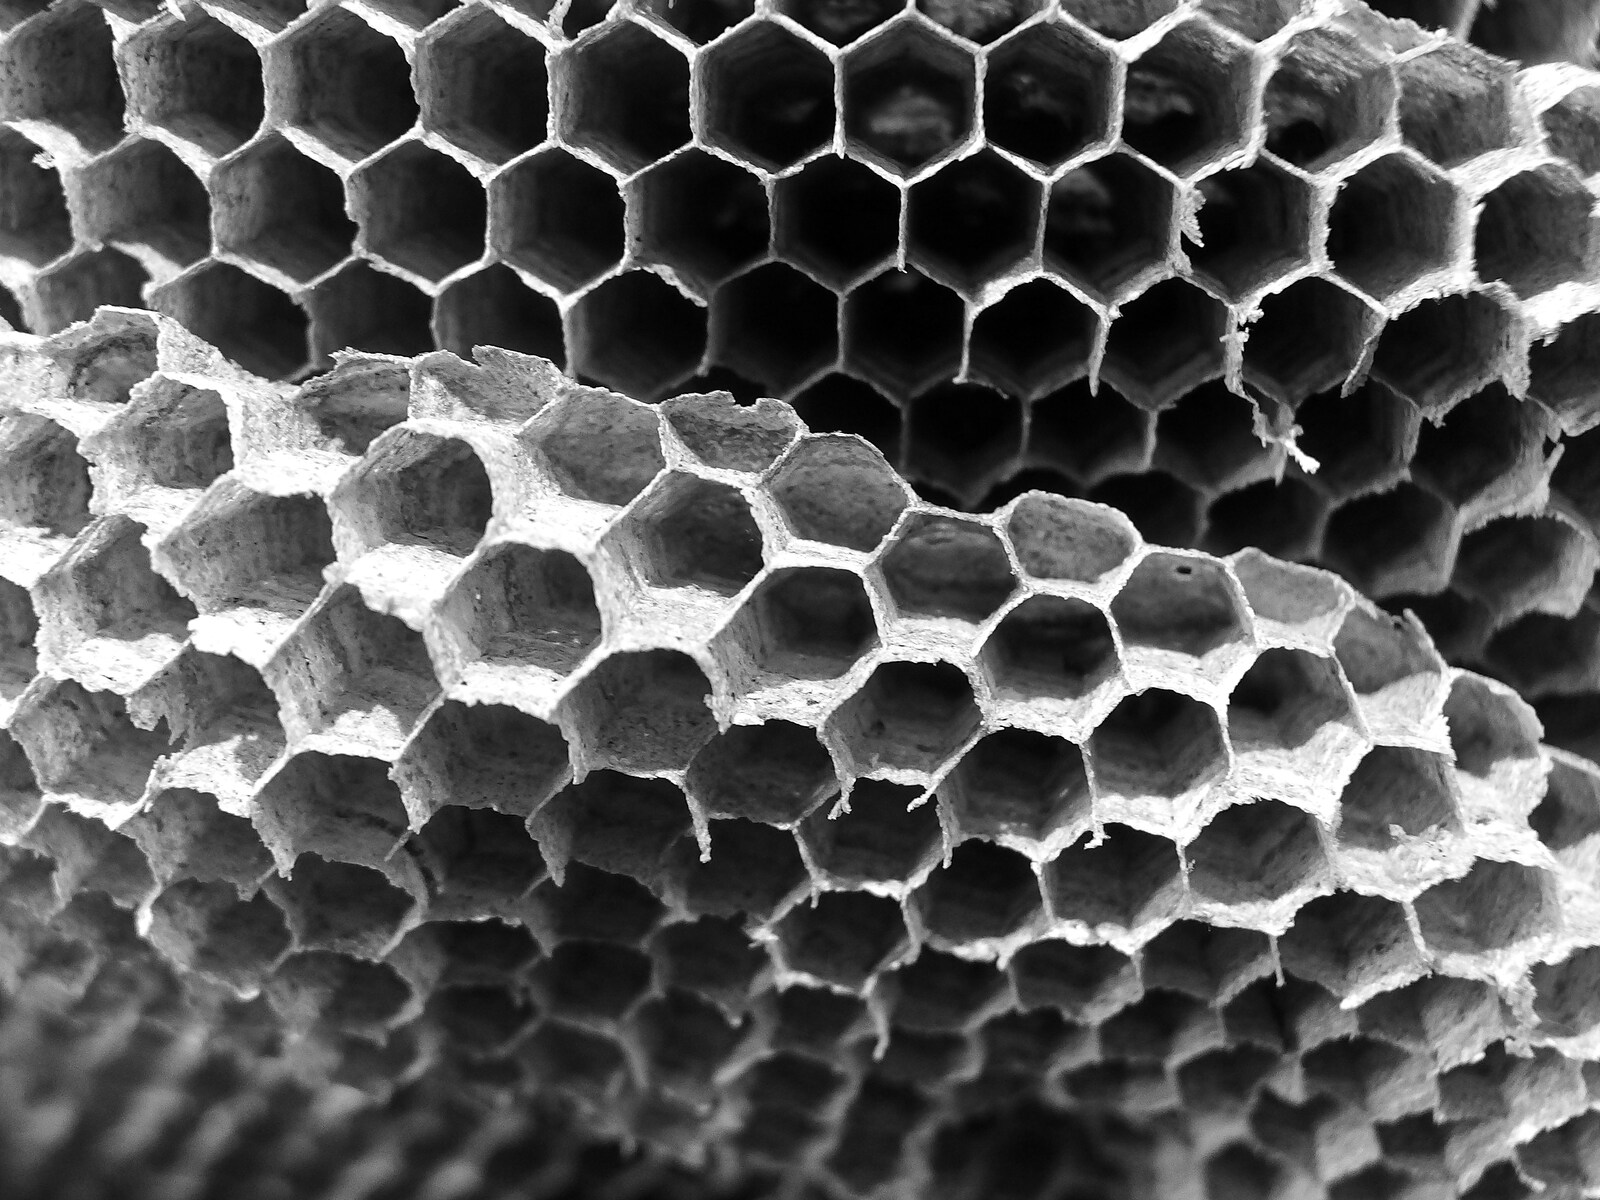 A closeup of wasp honeycombs from A Trip to Ampersand, Sawmills Road, Diss - 27th January 2023